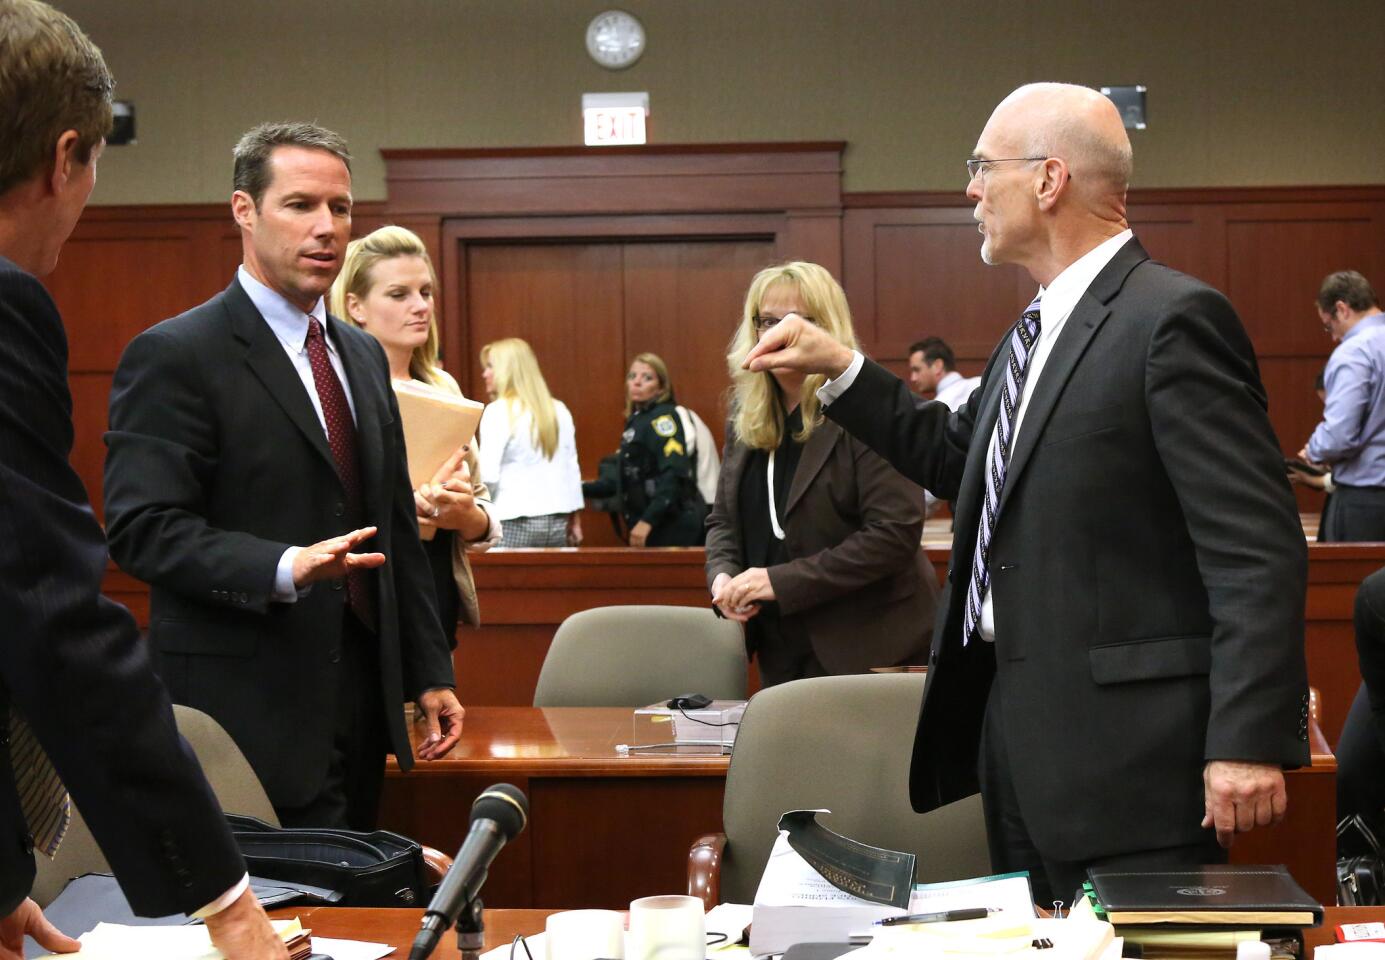 Defense counsel Don West addresses assistant state attorney John Guy after court recesses in the George Zimmerman trial in Seminole circuit court, in Sanford, Fla., late Tuesday night, July 9, 2013. Zimmerman is charged with 2nd-degree murder in the fatal shooting of Trayvon Martin, an unarmed teen, in 2012. (Joe Burbank/Orlando Sentinel/POOL) newsgate CCI B583047564Z.1